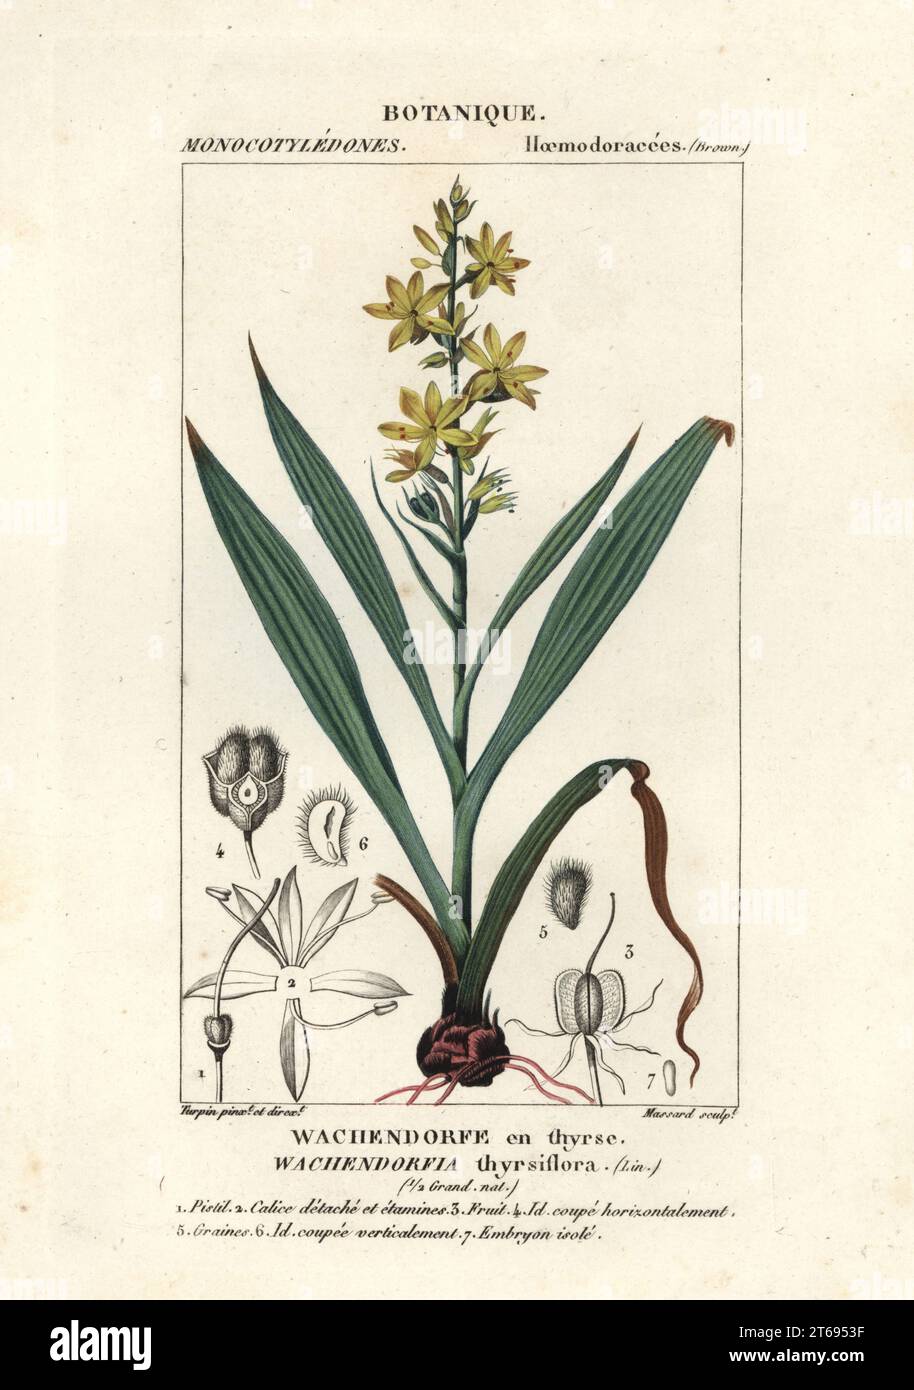 Red root, Wachendorfia thyrsiflora, native to South Africa. Handcoloured copperplate stipple engraving from Antoine Laurent de Jussieu's Dizionario delle Scienze Naturali, Dictionary of Natural Science, Florence, Italy, 1837. Illustration engraved by Massard, drawn and directed by Pierre Jean-Francois Turpin, and published by Batelli e Figli. Turpin (1775-1840) is considered one of the greatest French botanical illustrators of the 19th century. Stock Photo